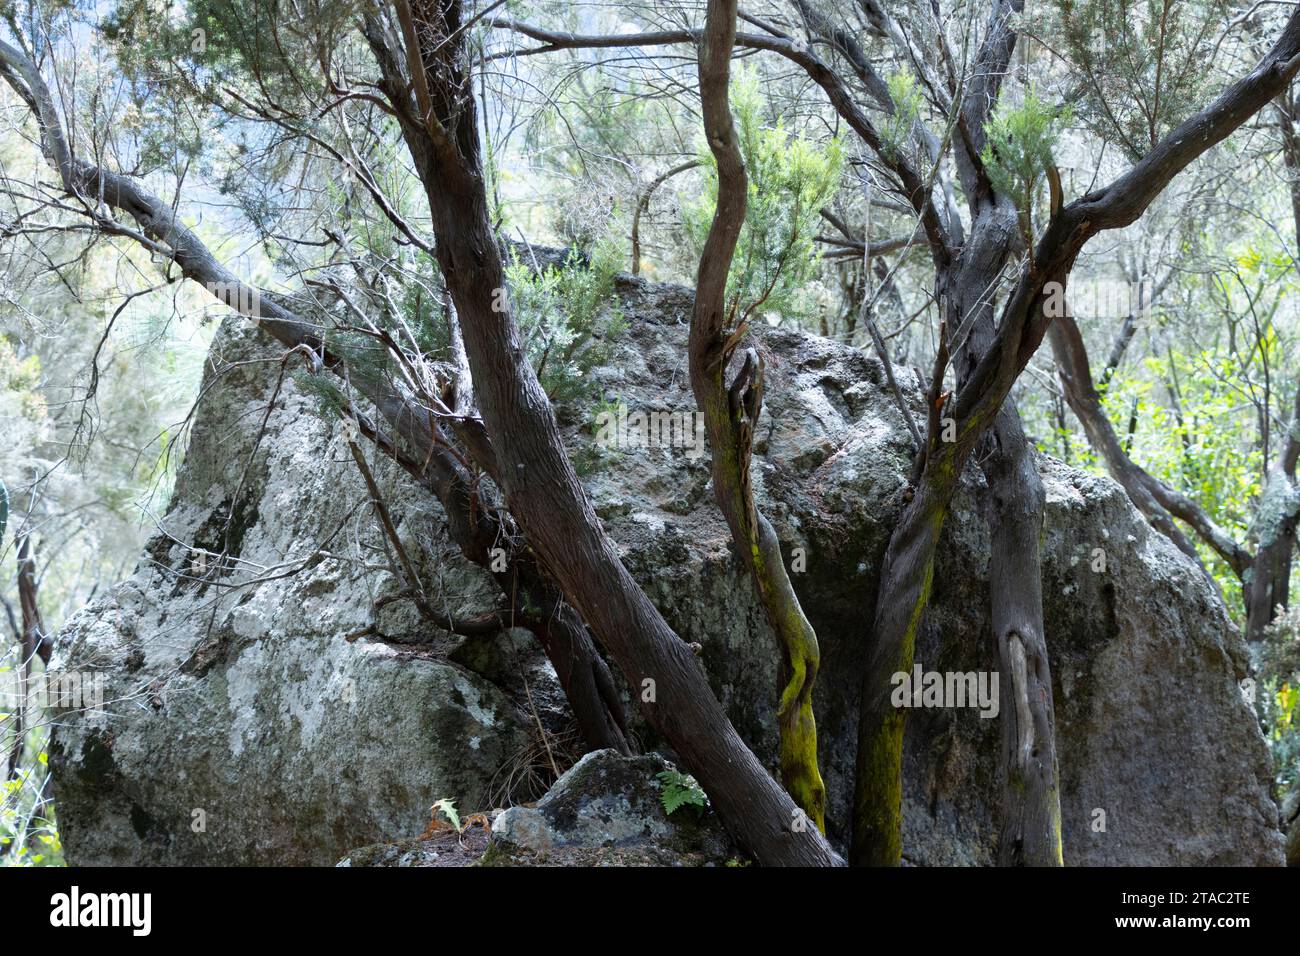 canarian fayal-brezal forest. tree trunks and a rock full of moss and lichens. Stock Photo